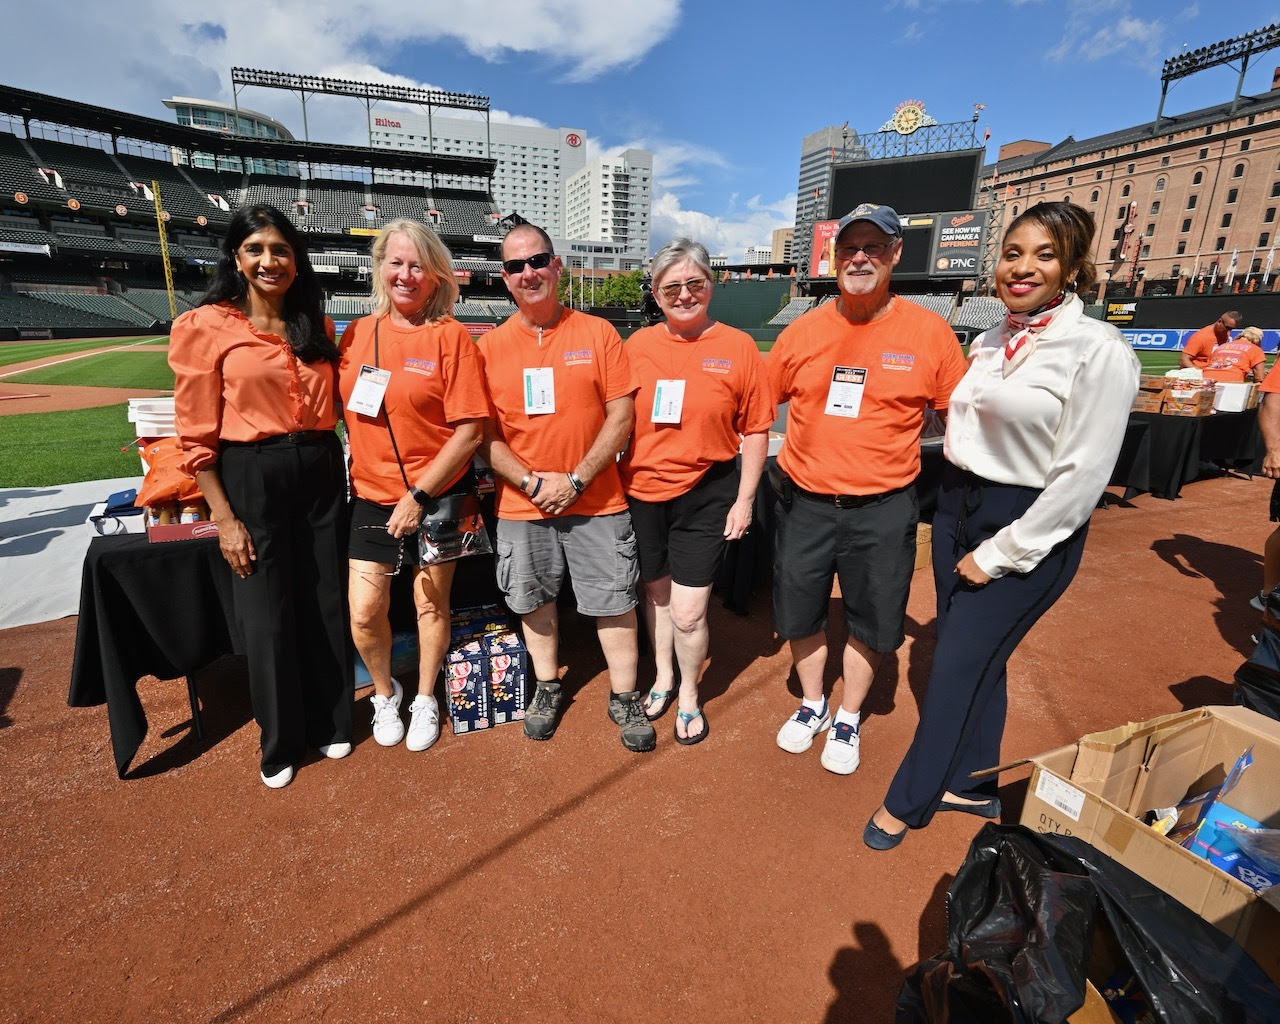 Lt. Governor Miller and First Lady Moore with Orioles staff